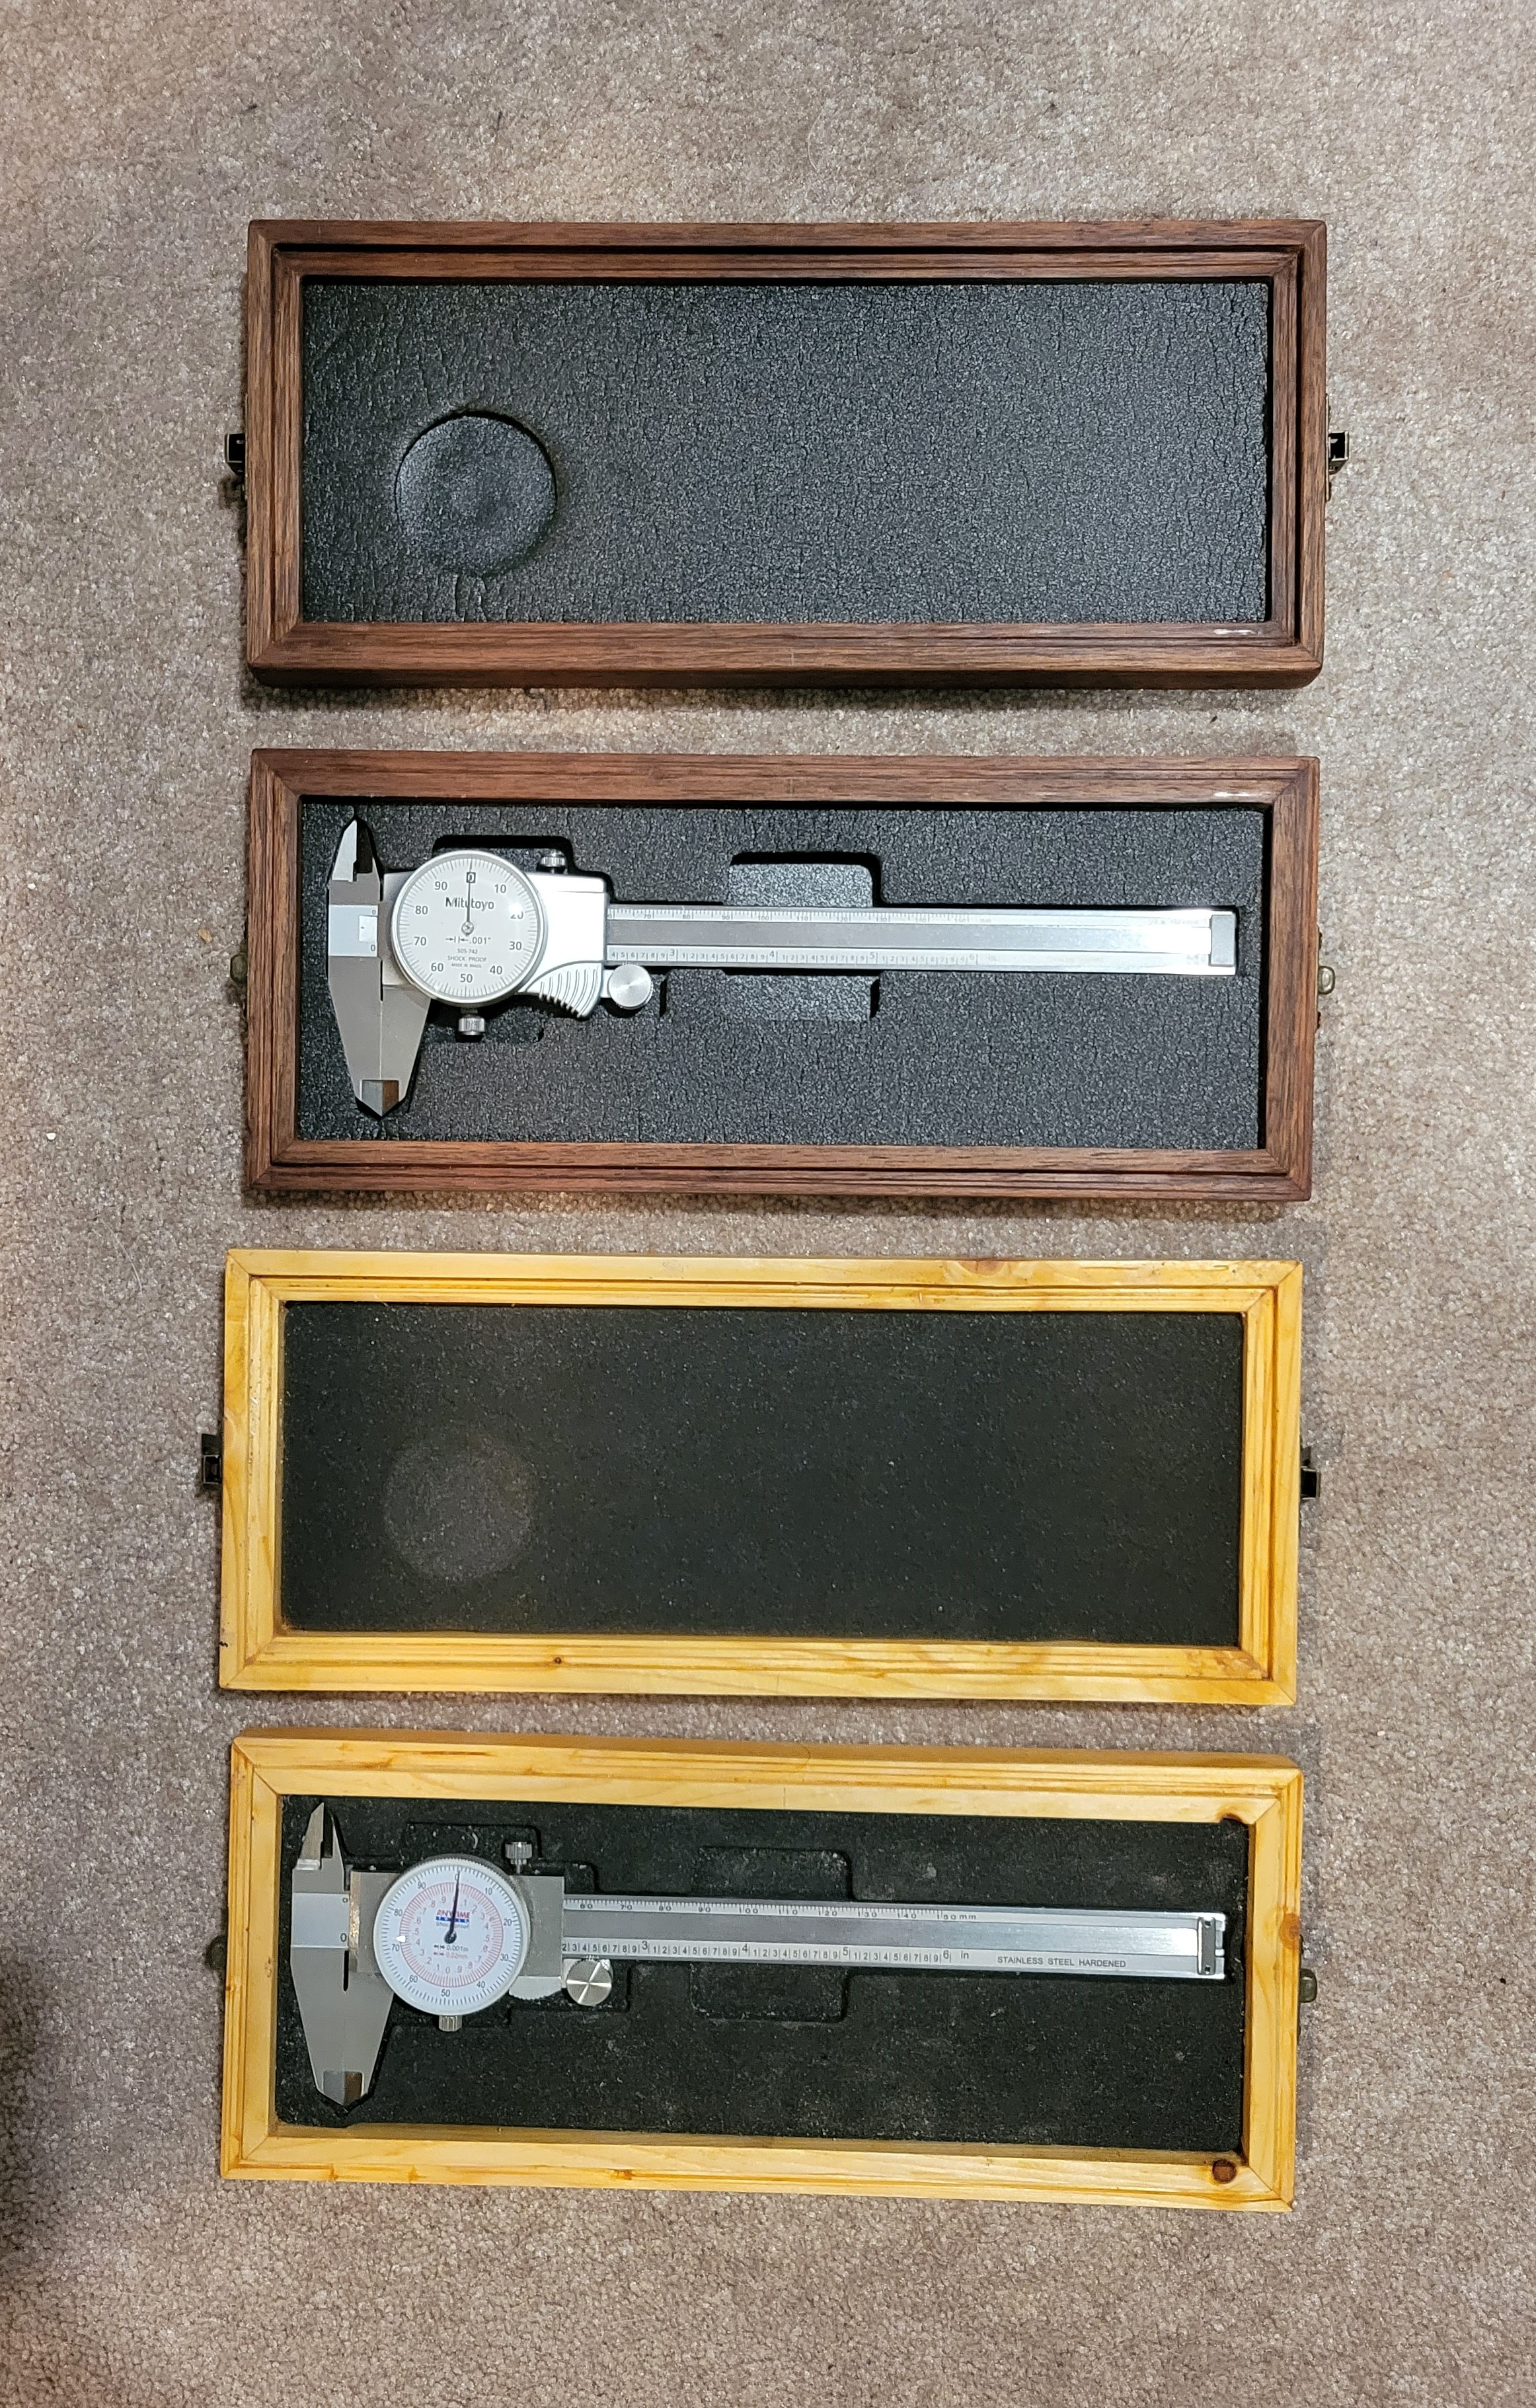 two pairs of calipers, each in a box